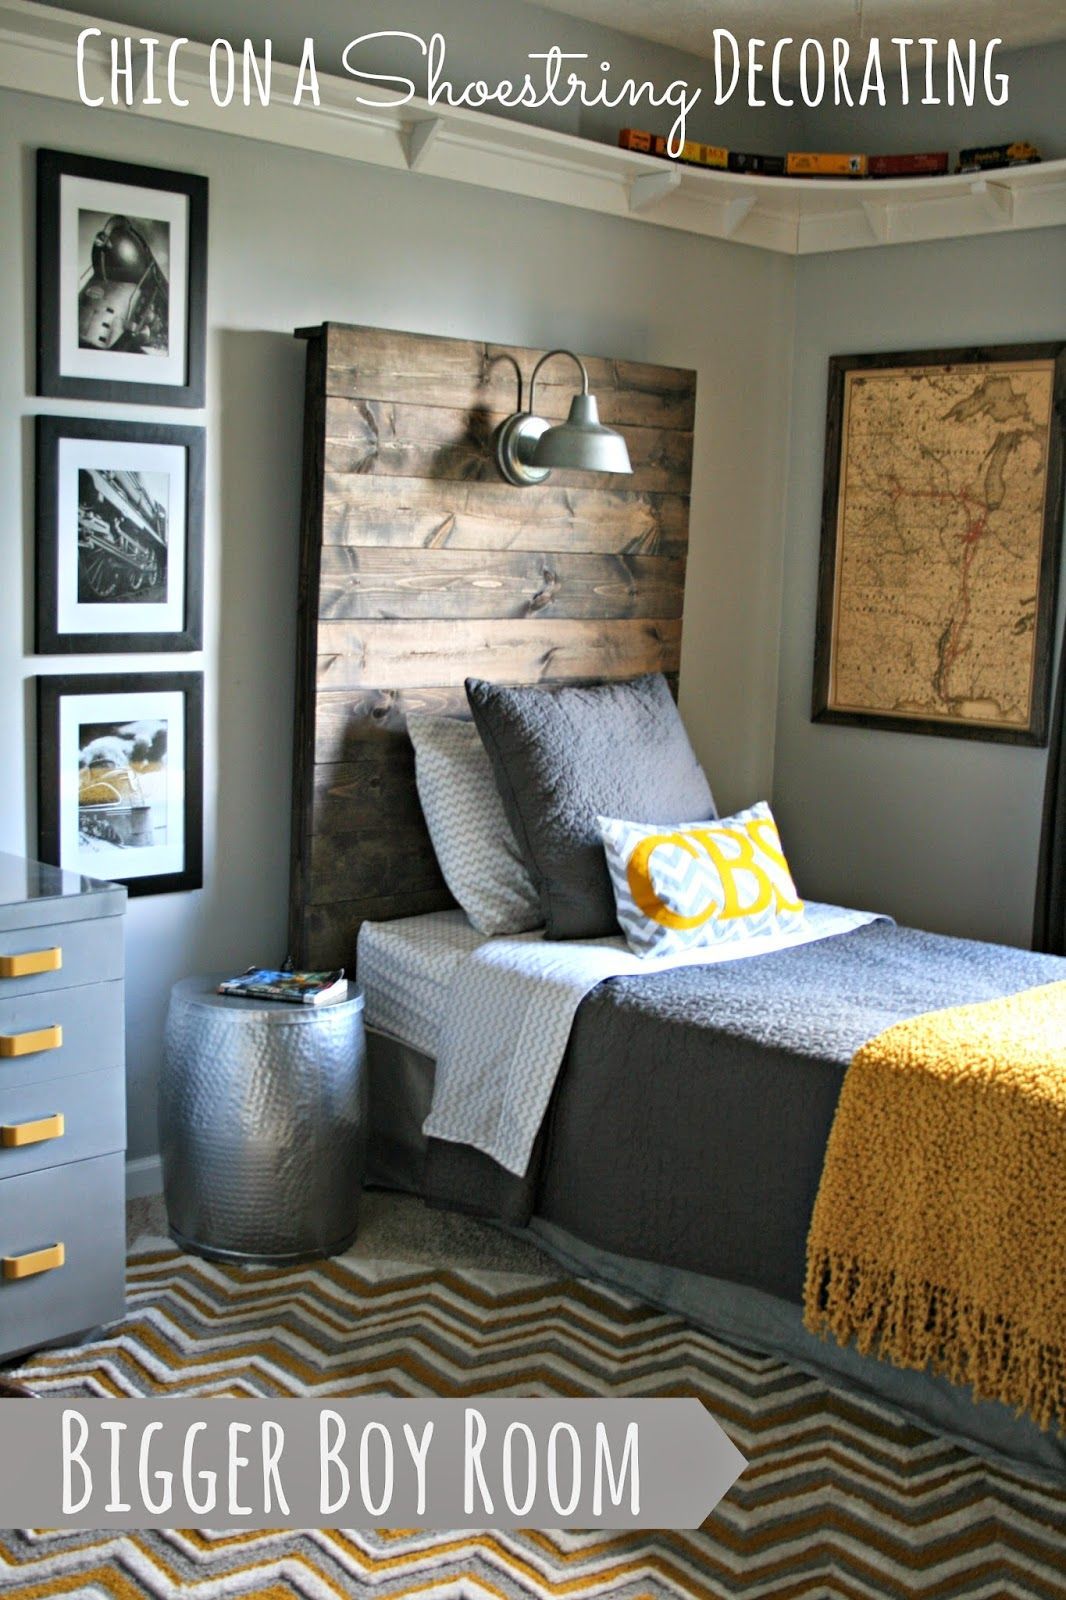 How to Make a Rustic Headboard with a Light Fixture by Chic on a Shoestring Decorating- What an amazing kids bedroom!